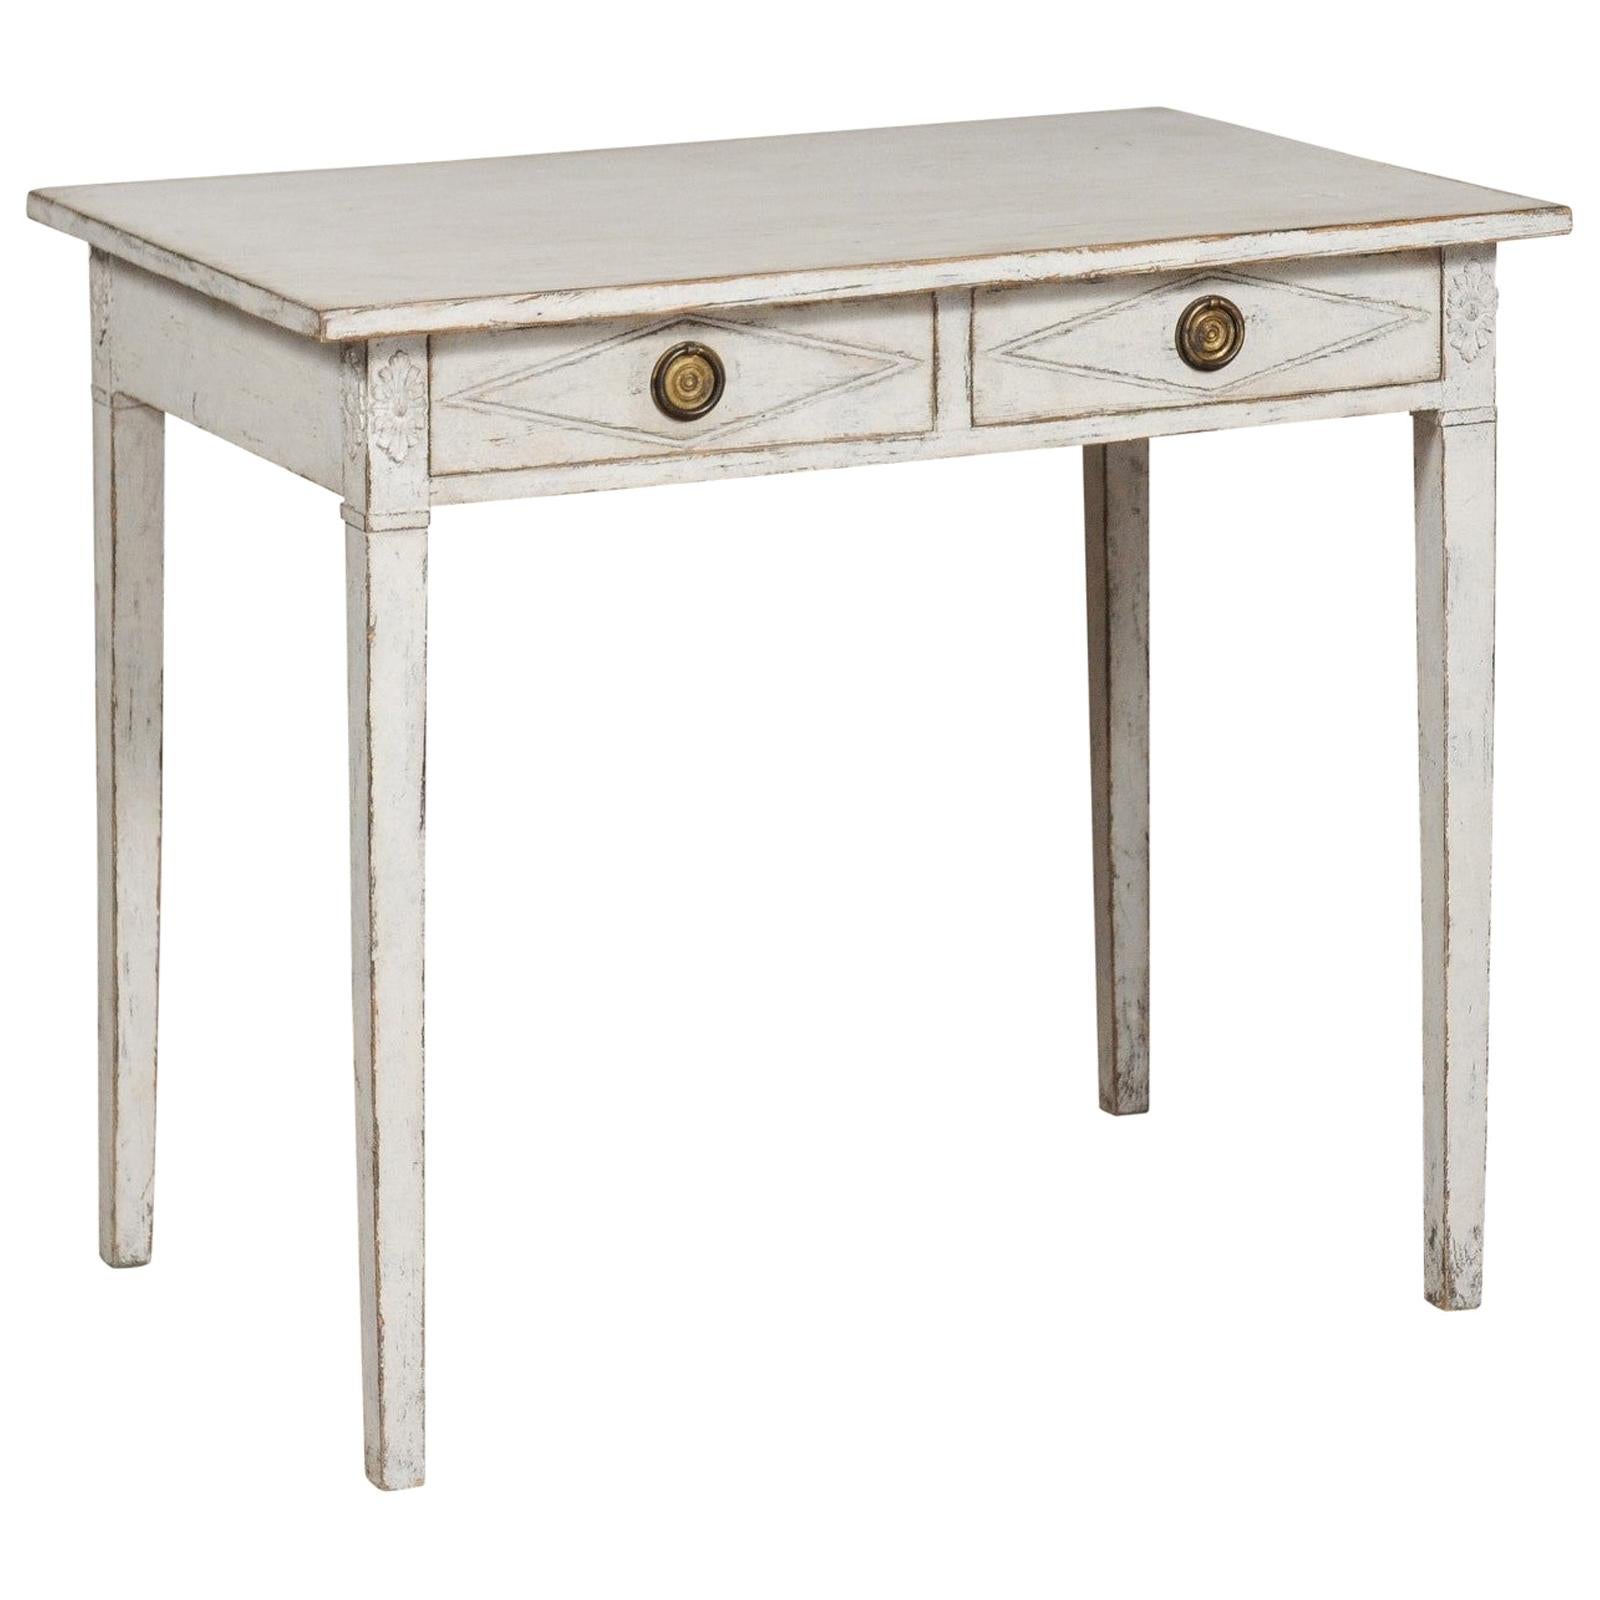 Swedish Gustavian Style Painted Wood Desk with Two Drawers and Diamond Motifs